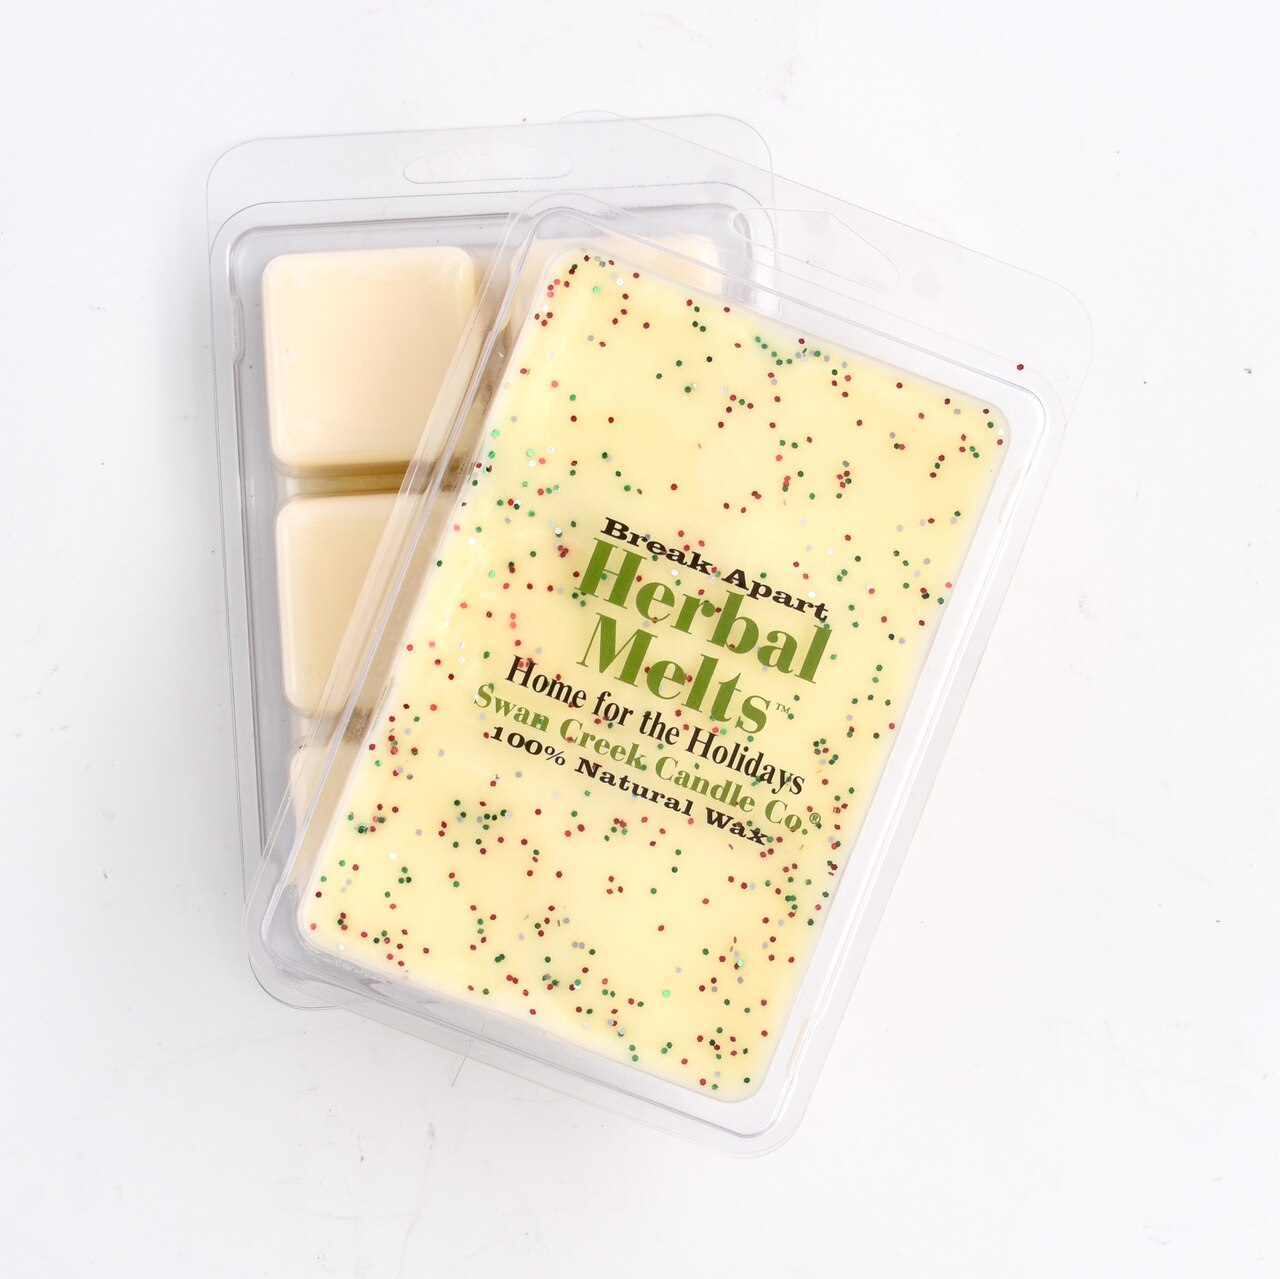 Image of Home For The Holidays 5.25oz Drizzle Melts by Swan Creek Candle